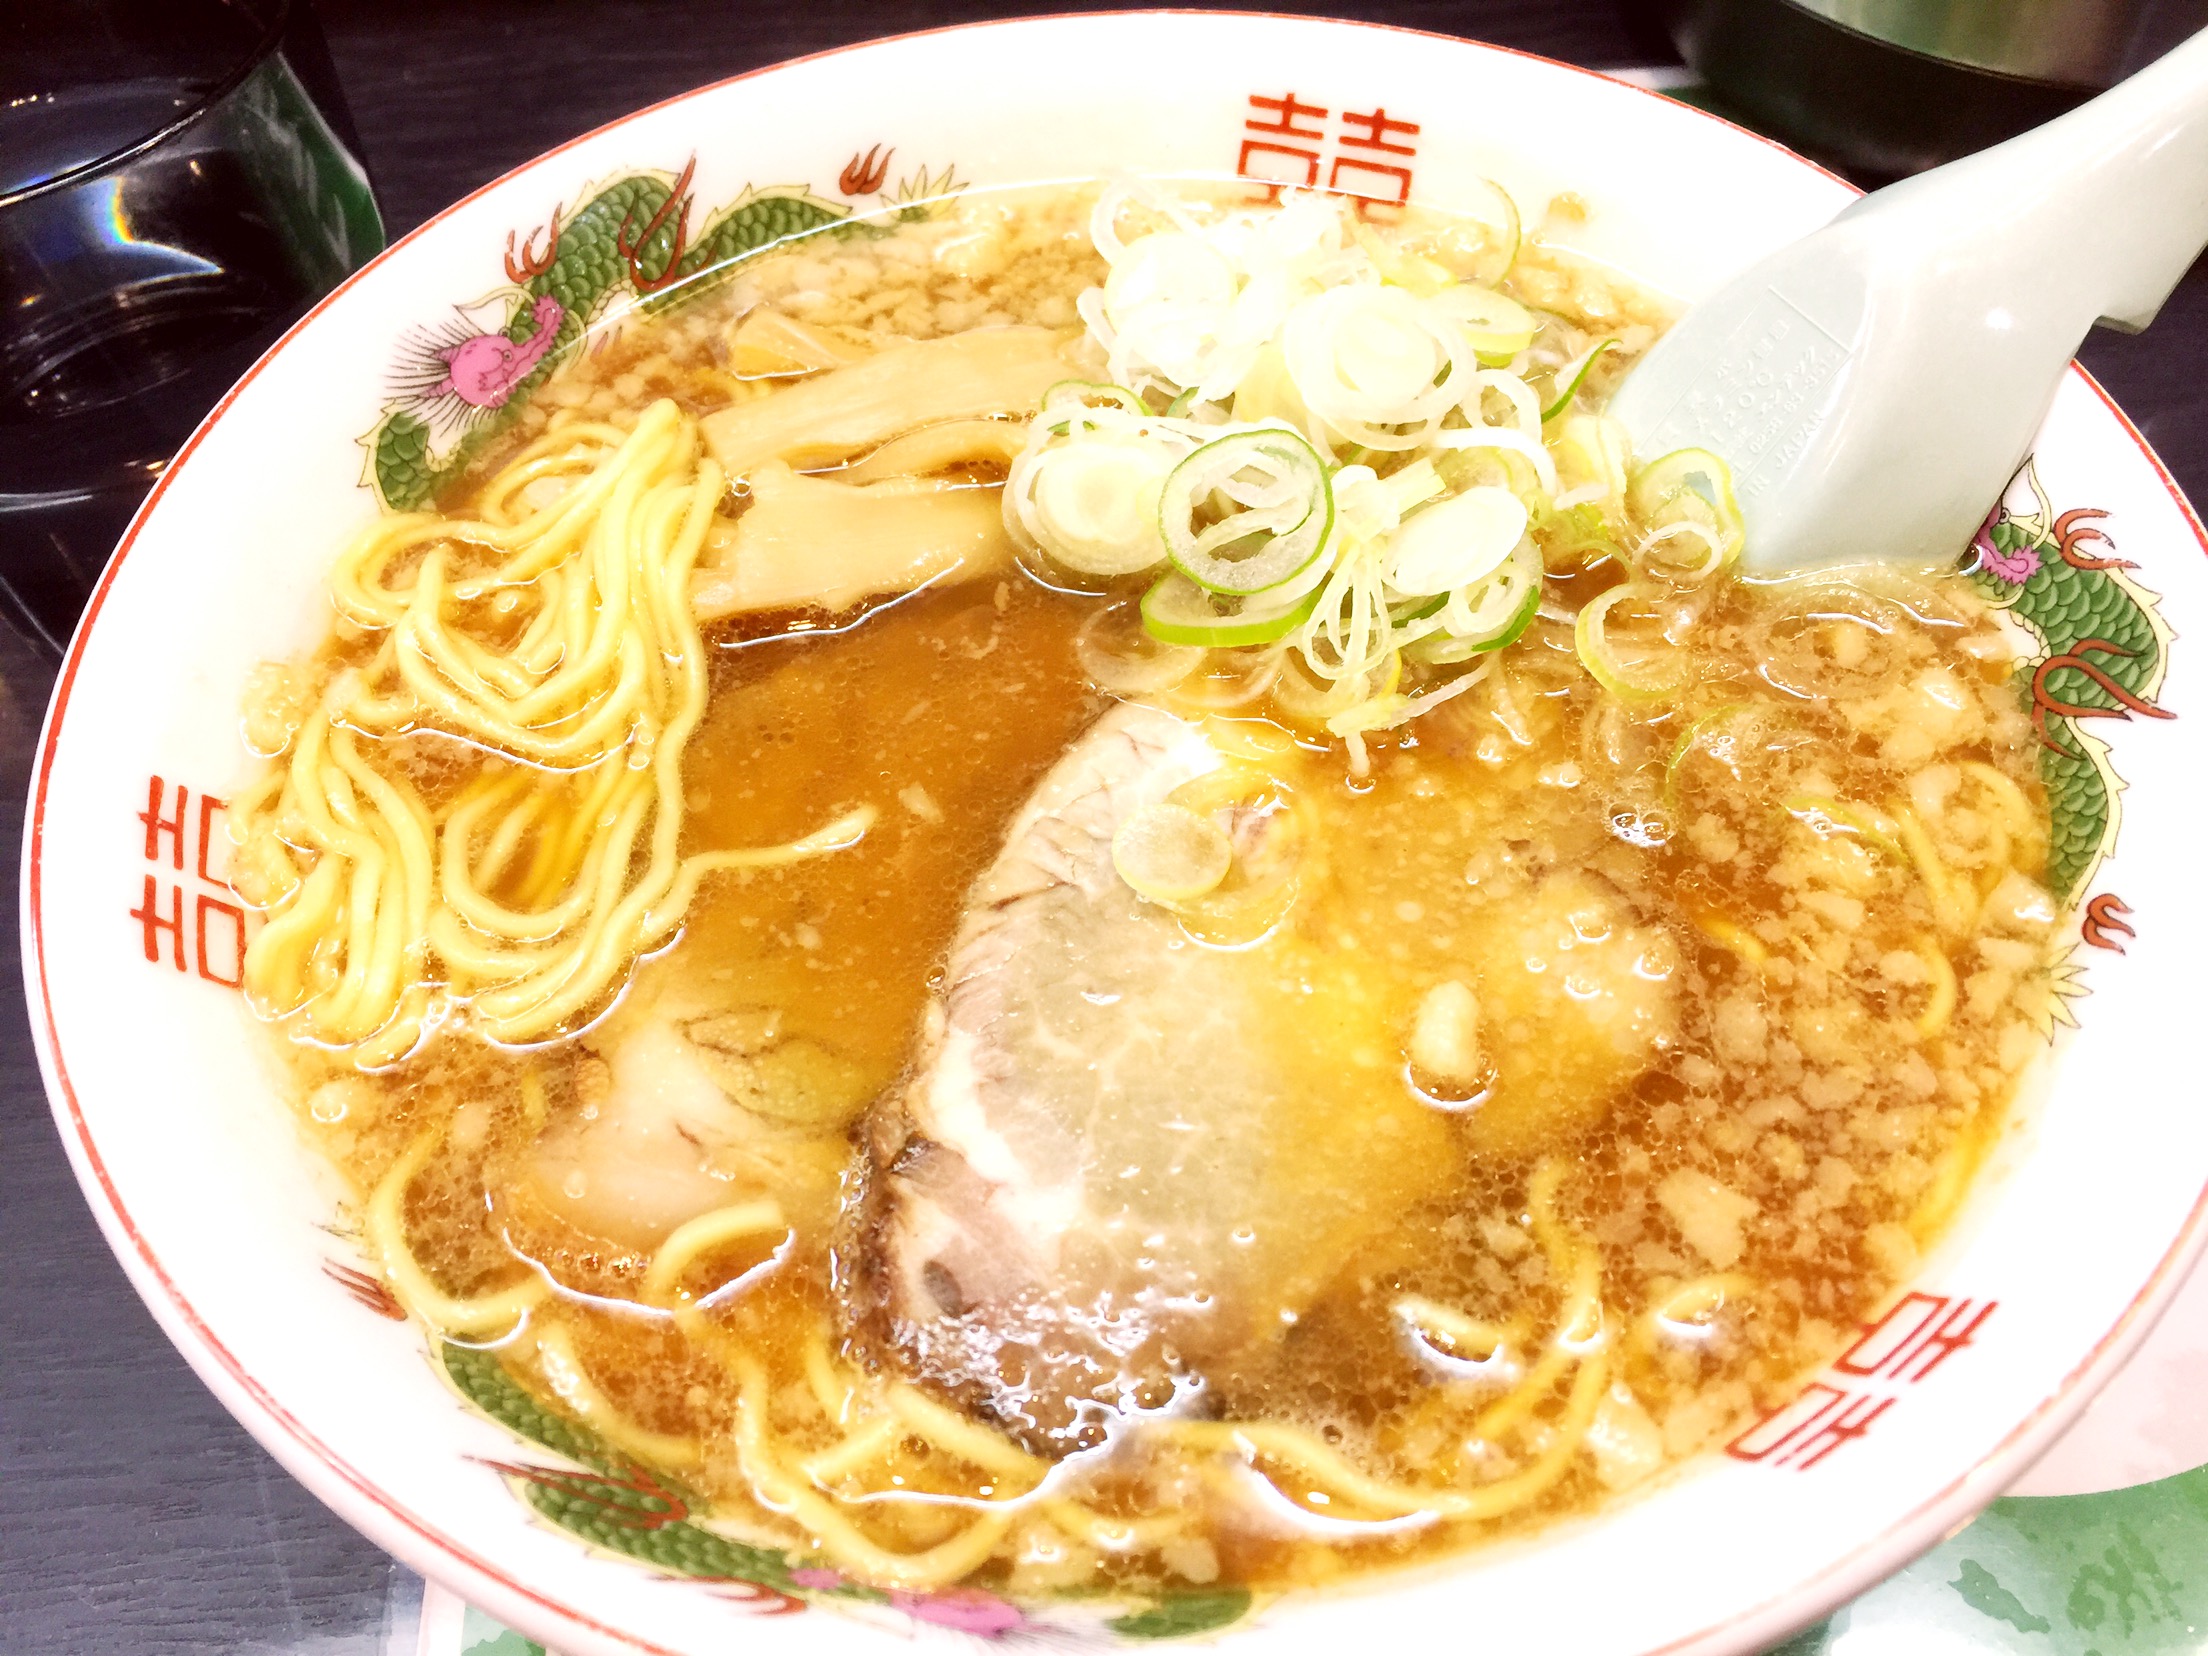 Asahikawa ramen, which was close to the end of the store, had a deeper memory as the real pleasure of traveling than the taste.